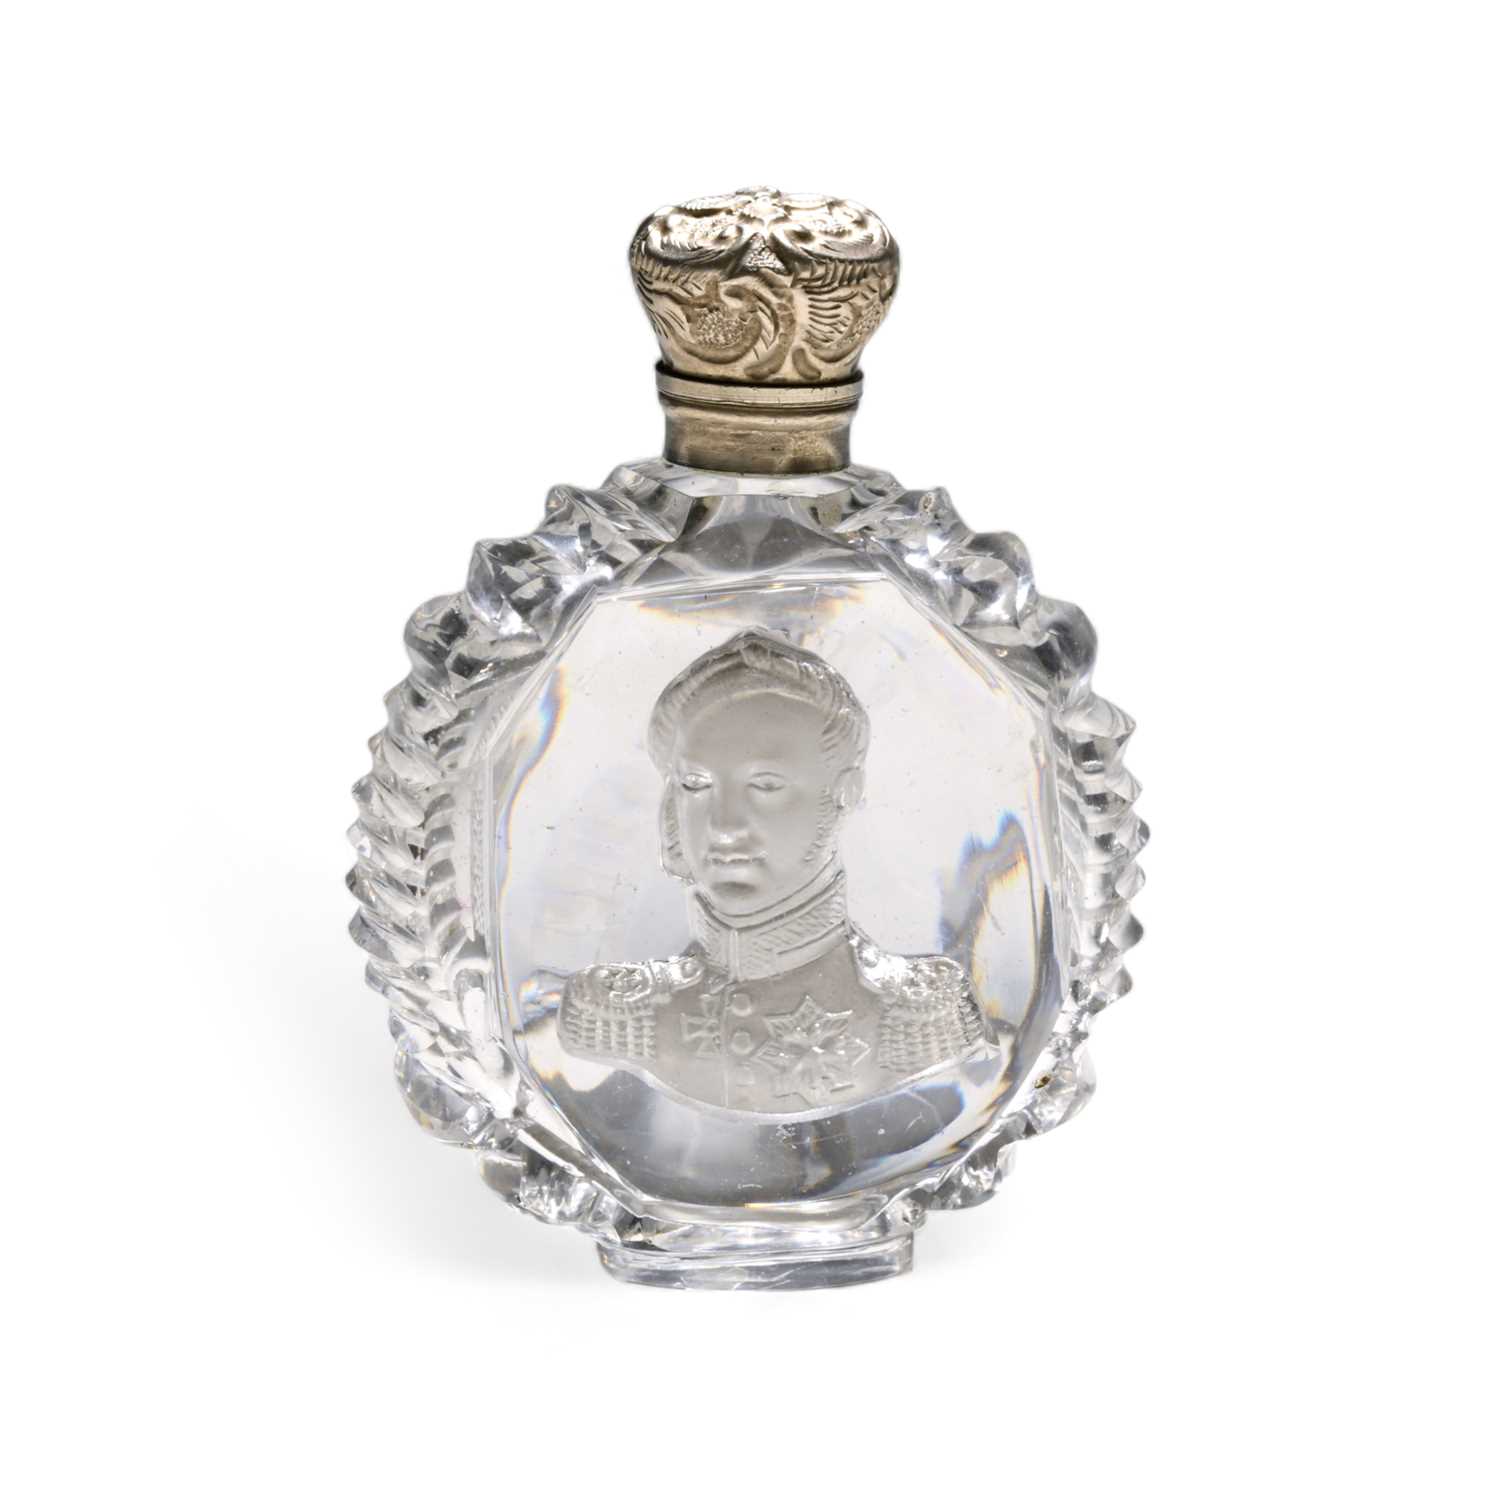 A cut glass sulphide scent bottle, 19th century, set with the head and shoulders portrait of a